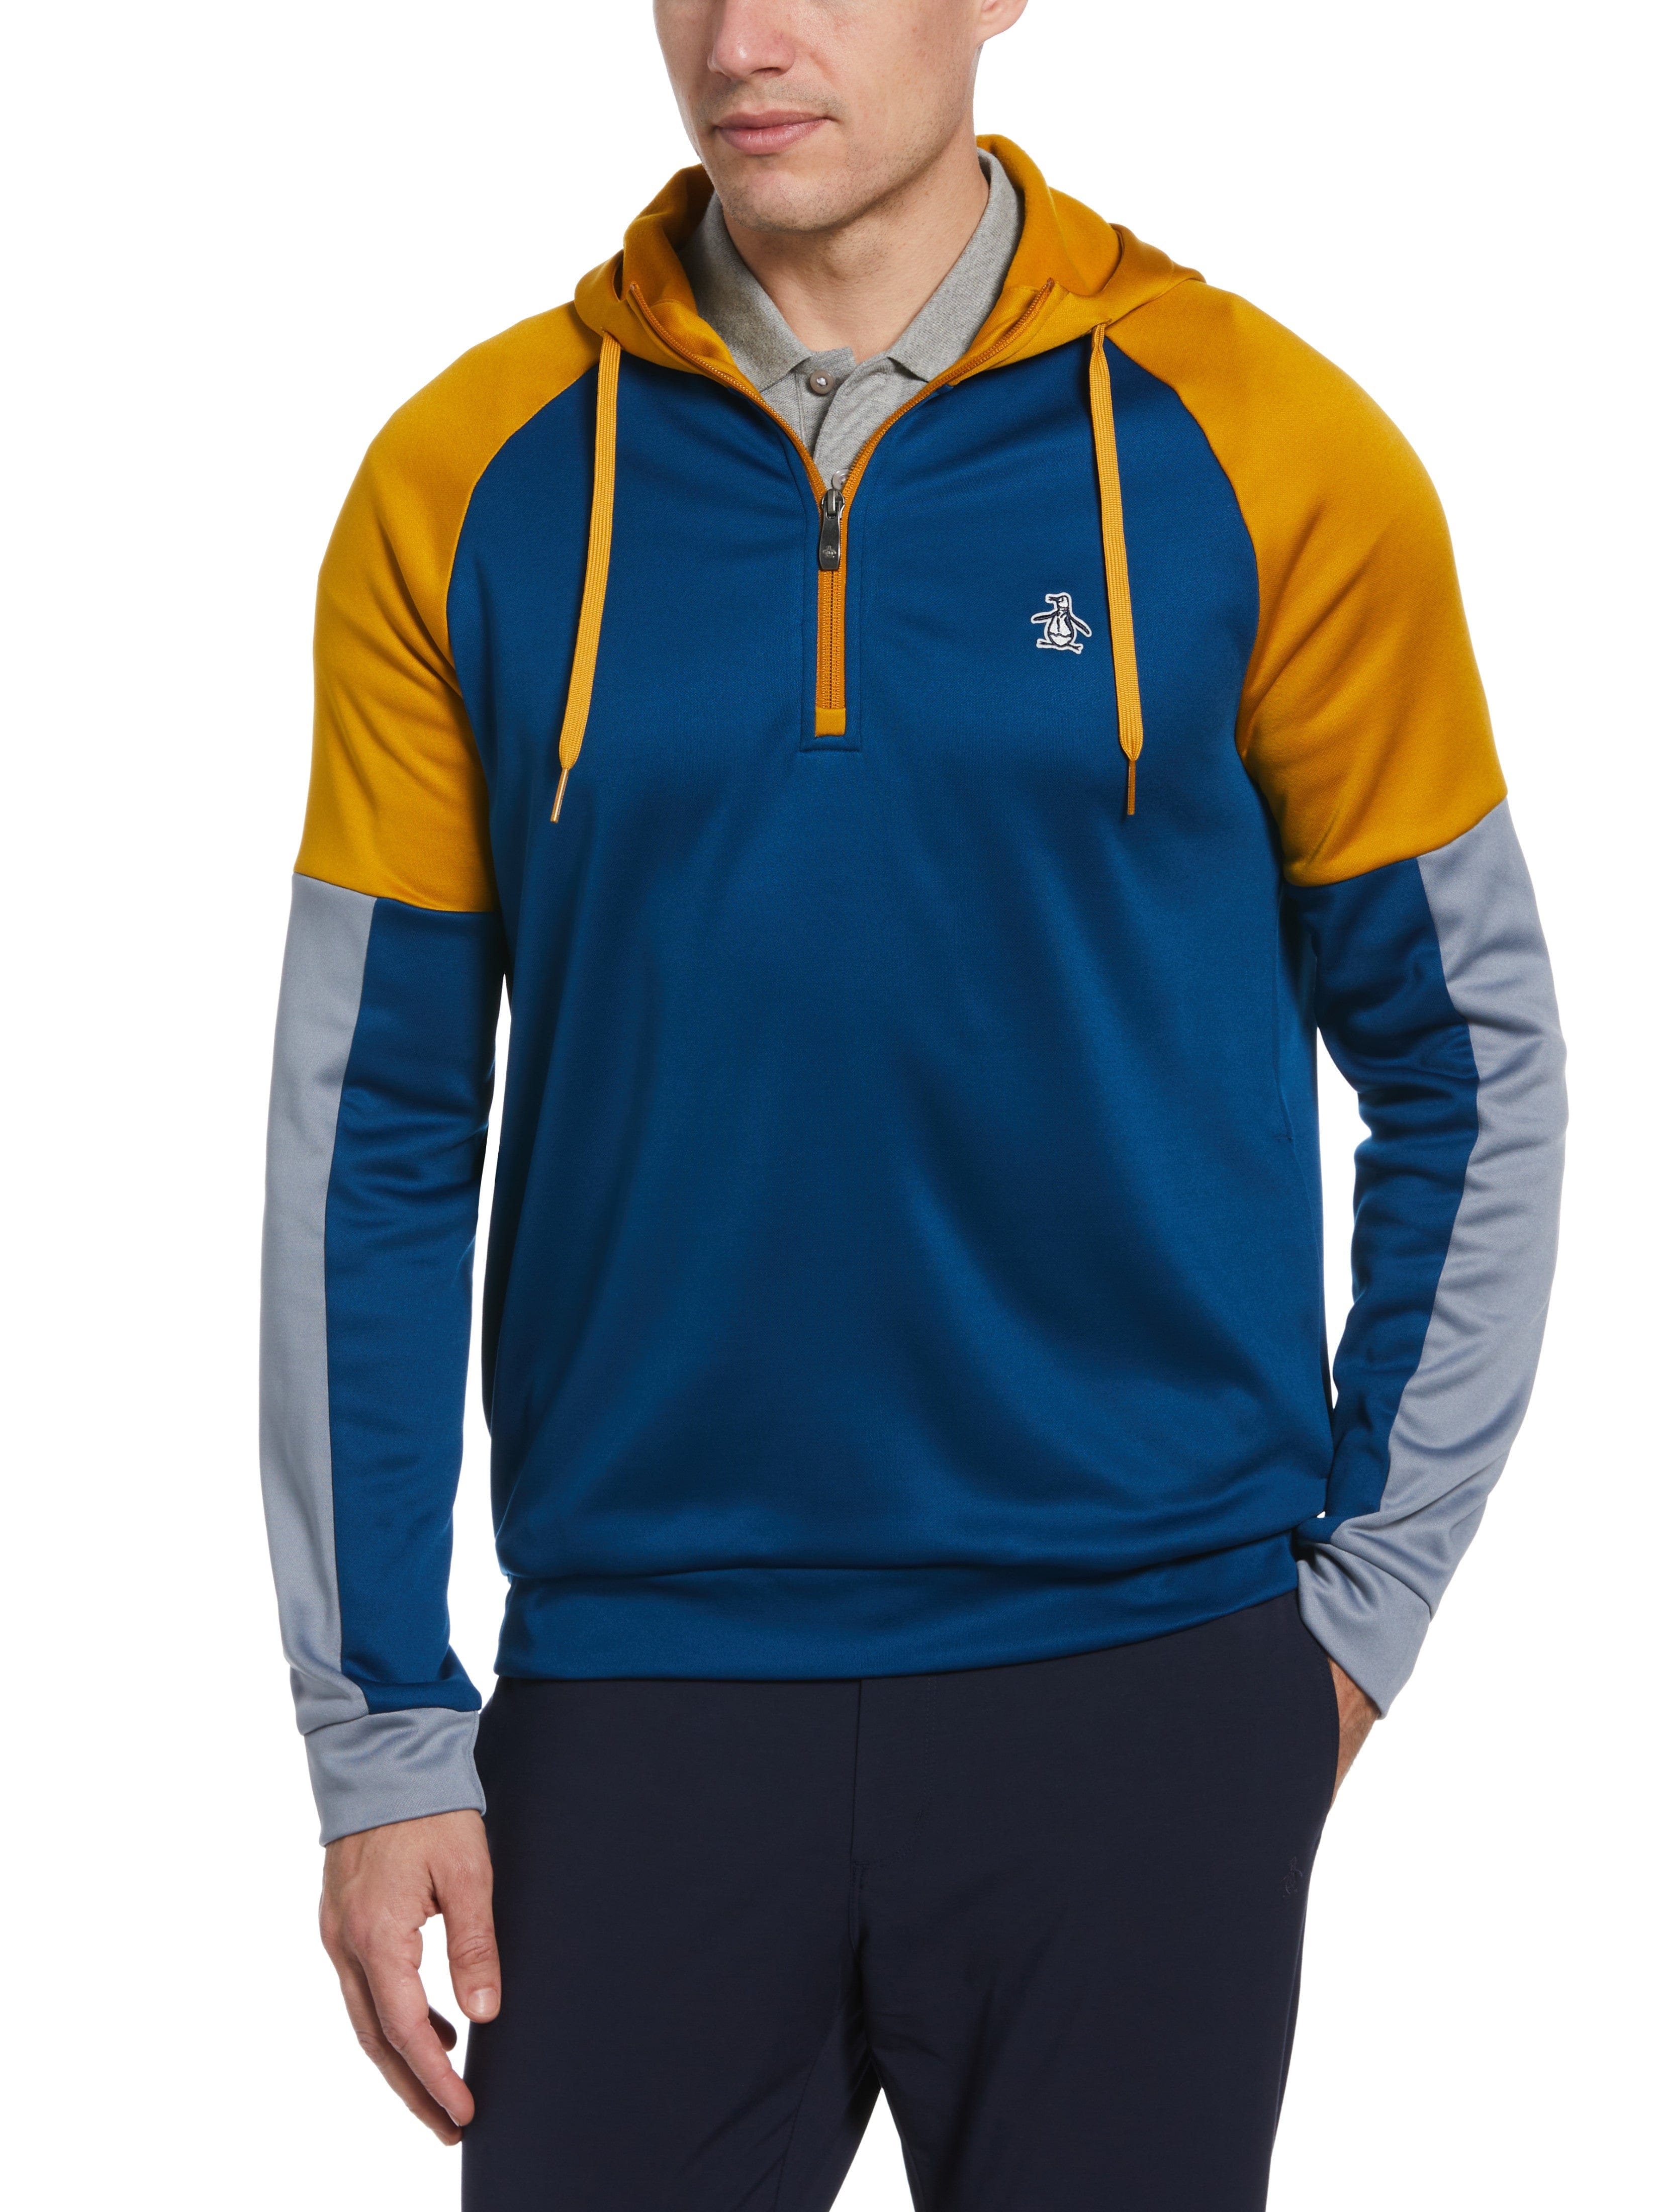 Original Penguin Mens Crossover Hoodie Pullover Top, Size Small, Blueberry Pancake, 100% Polyester | Golf Apparel Shop